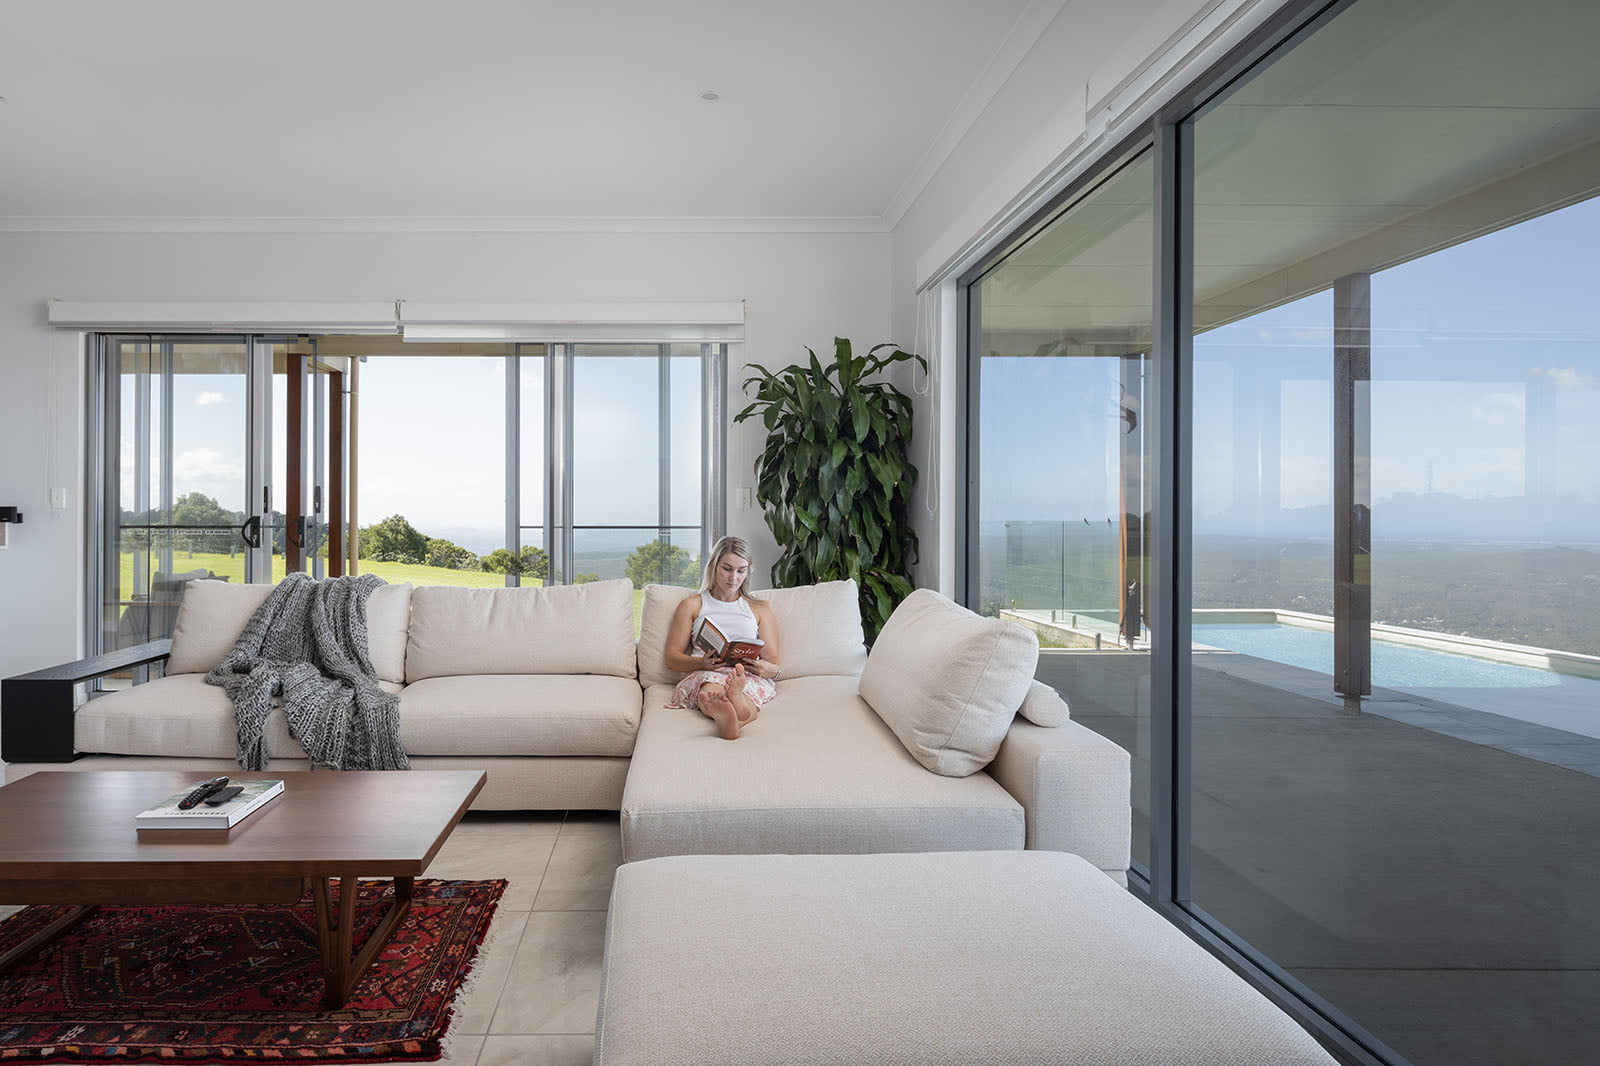 Living room with large windows and a view of an outdoor swimming pool and lush landscape on the Sunshine Coast.